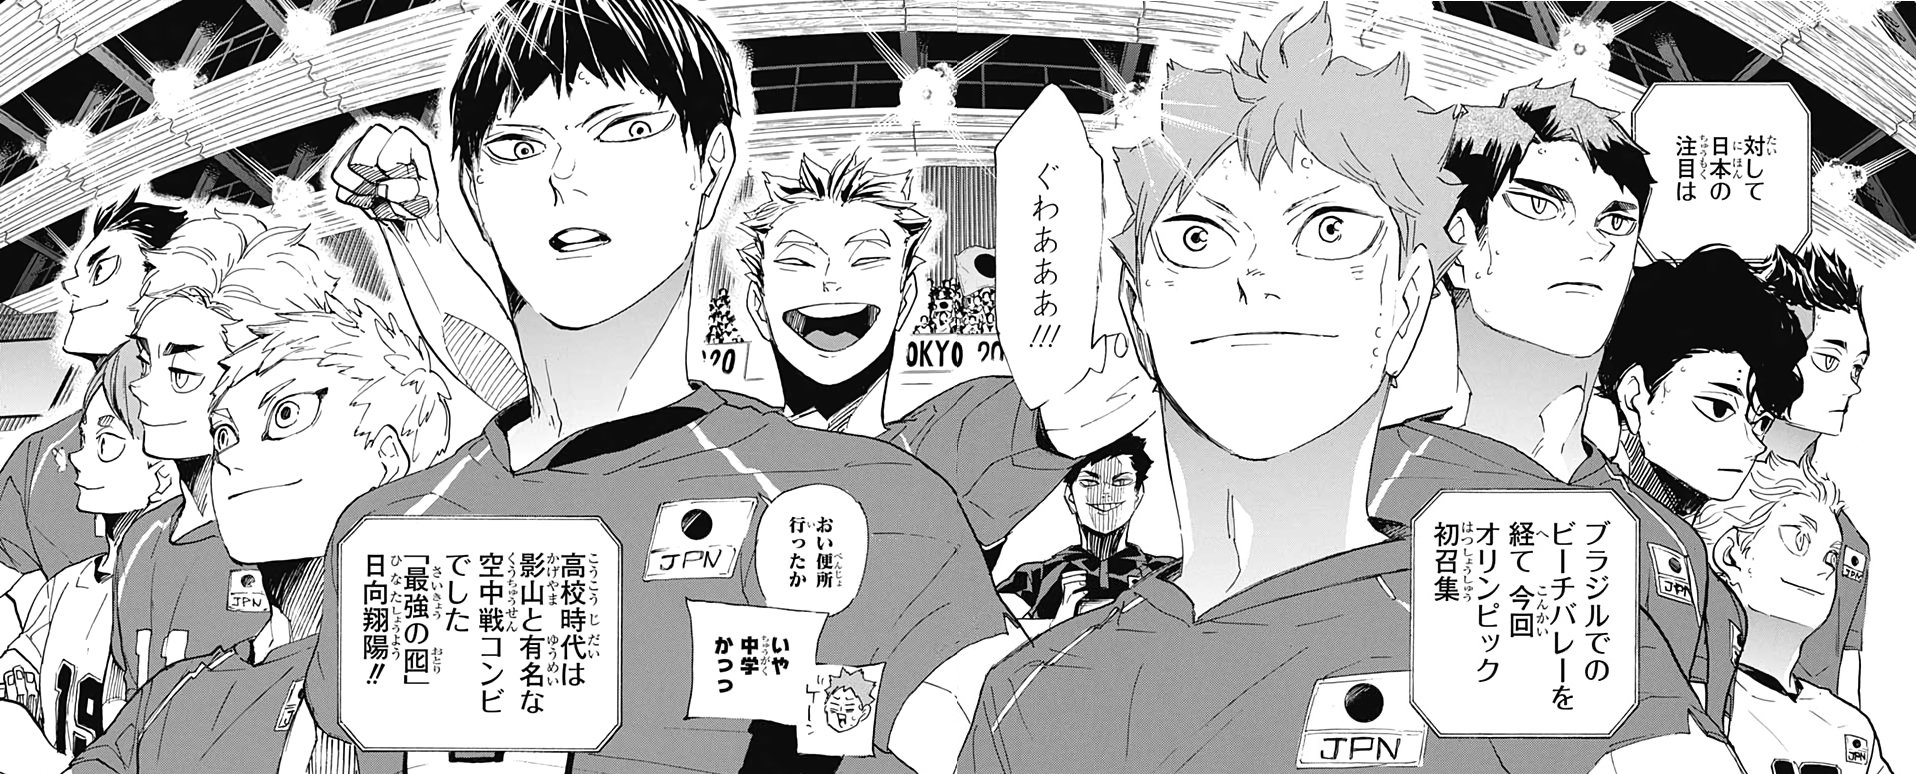 When is 'Haikyuu!!' Season 5 Coming Out? | The Mary Sue